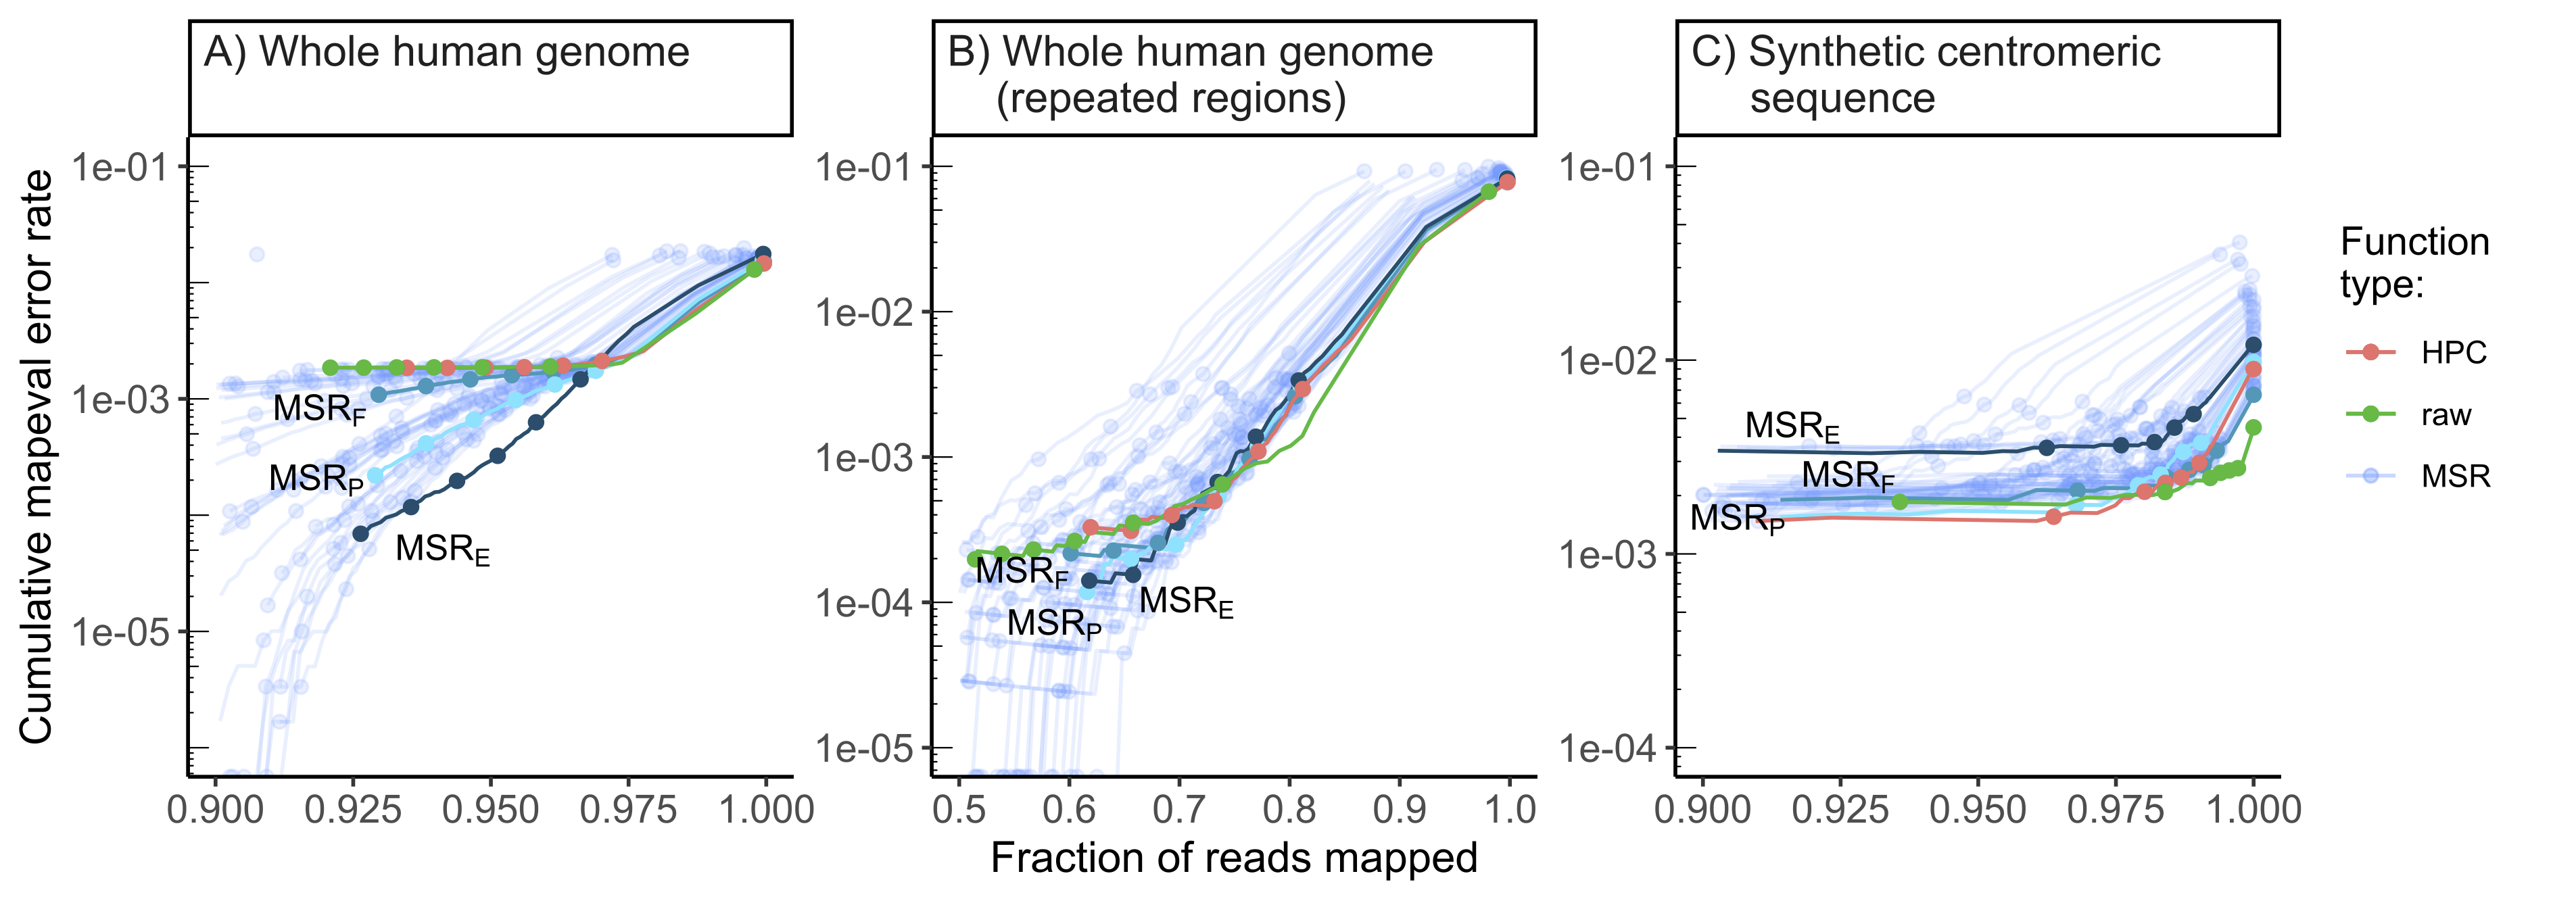  **Performance of our 58 selected mapping-friendly sequence reductions
across genomes on reads simulated by `nanosim`.**  
Panel **A)** shows the whole human genome assembly, **B)** the subset of
mapped reads from panel B that originate from repetitive regions, and
**C)** the "TandemTools" synthetic centromeric reference sequence. We
highlighted the best-performing mapping-friendly sequence reductions as
MSR E, F and P, respectively in terms of cumulative `mapeval` error
rate, fraction of reads mapped, and percentage of better thresholds than
HPC. Each point on a line represents, from left to right, the mapping
quality thresholds 60, 50, 40, 30, 20, 10 and 0. For the first point of
each line, only reads of mapping quality 60 are considered, and the y
value represents the rate of these reads that are not correctly mapped,
the x value represents the fraction of simulated reads that are mapped
at this threshold. The next point is computed for all reads of mapping
quality $\geq50$, etc. The rightmost point on any curve represents the
mapping error rate and the fraction of mapped reads for all primary
alignments. The x-axes are clipped for lower mapped read fractions to
better differentiate HPC, raw and MSRs E, F and P.